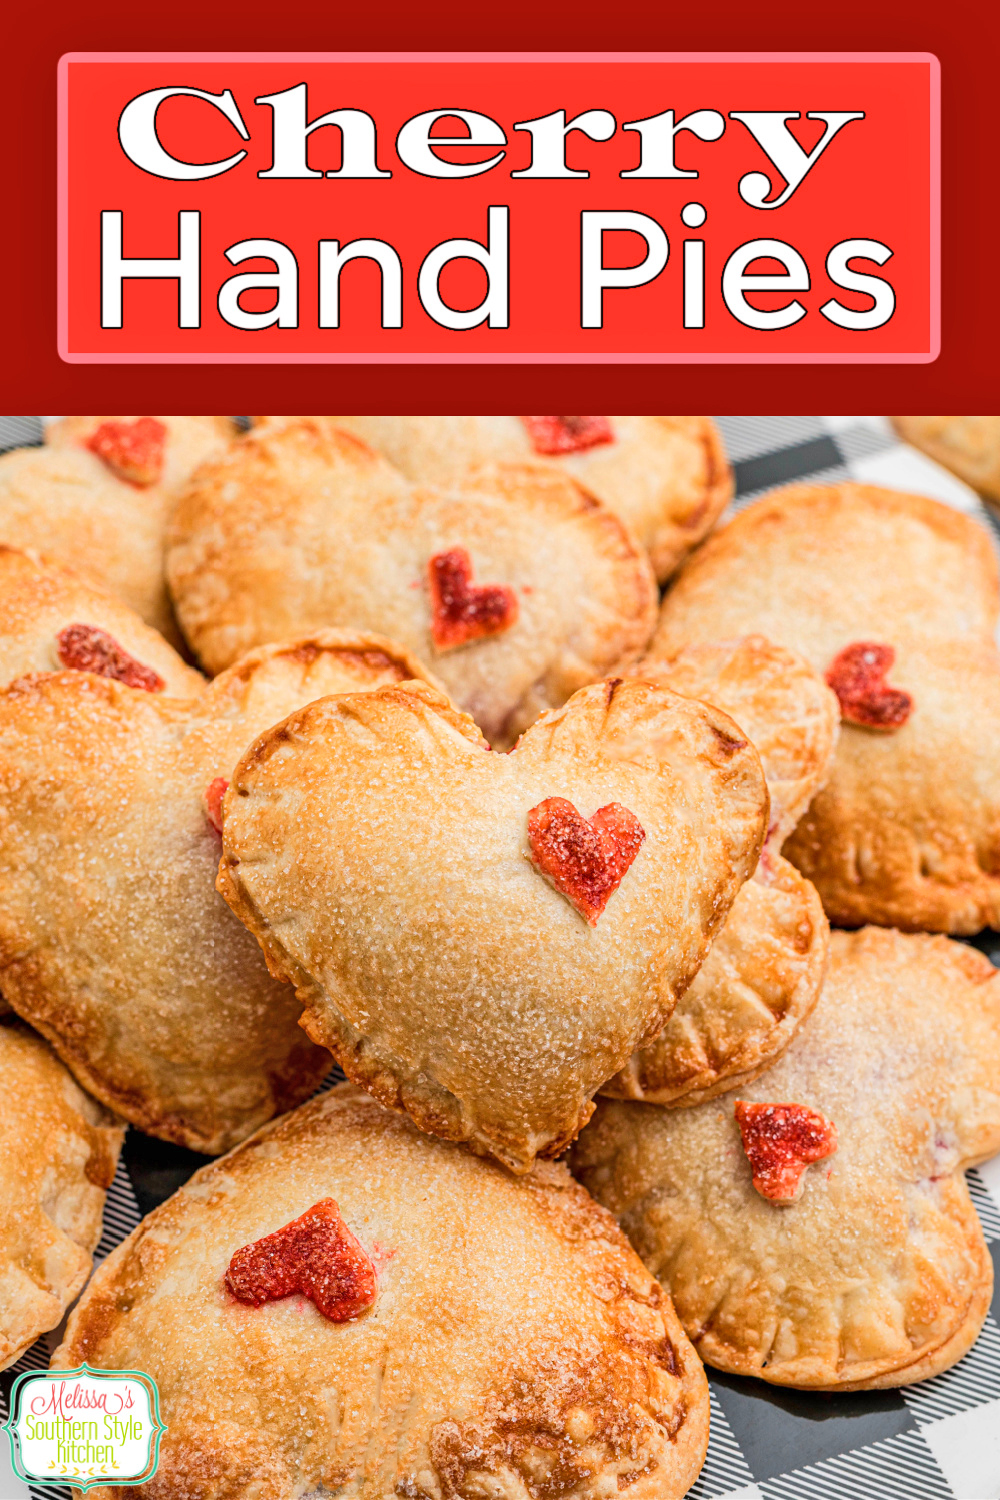 These heart shaped Cherry Hand Pies are a sensational homemade dessert that says "I love you" with each and  every bite #cherrypie #easycherrypierecipes #pies #valnetinesday #valnetinesdaydesserts #cherries #minipies #cherryhandpies #heartshapedcherrypies via @melissasssk